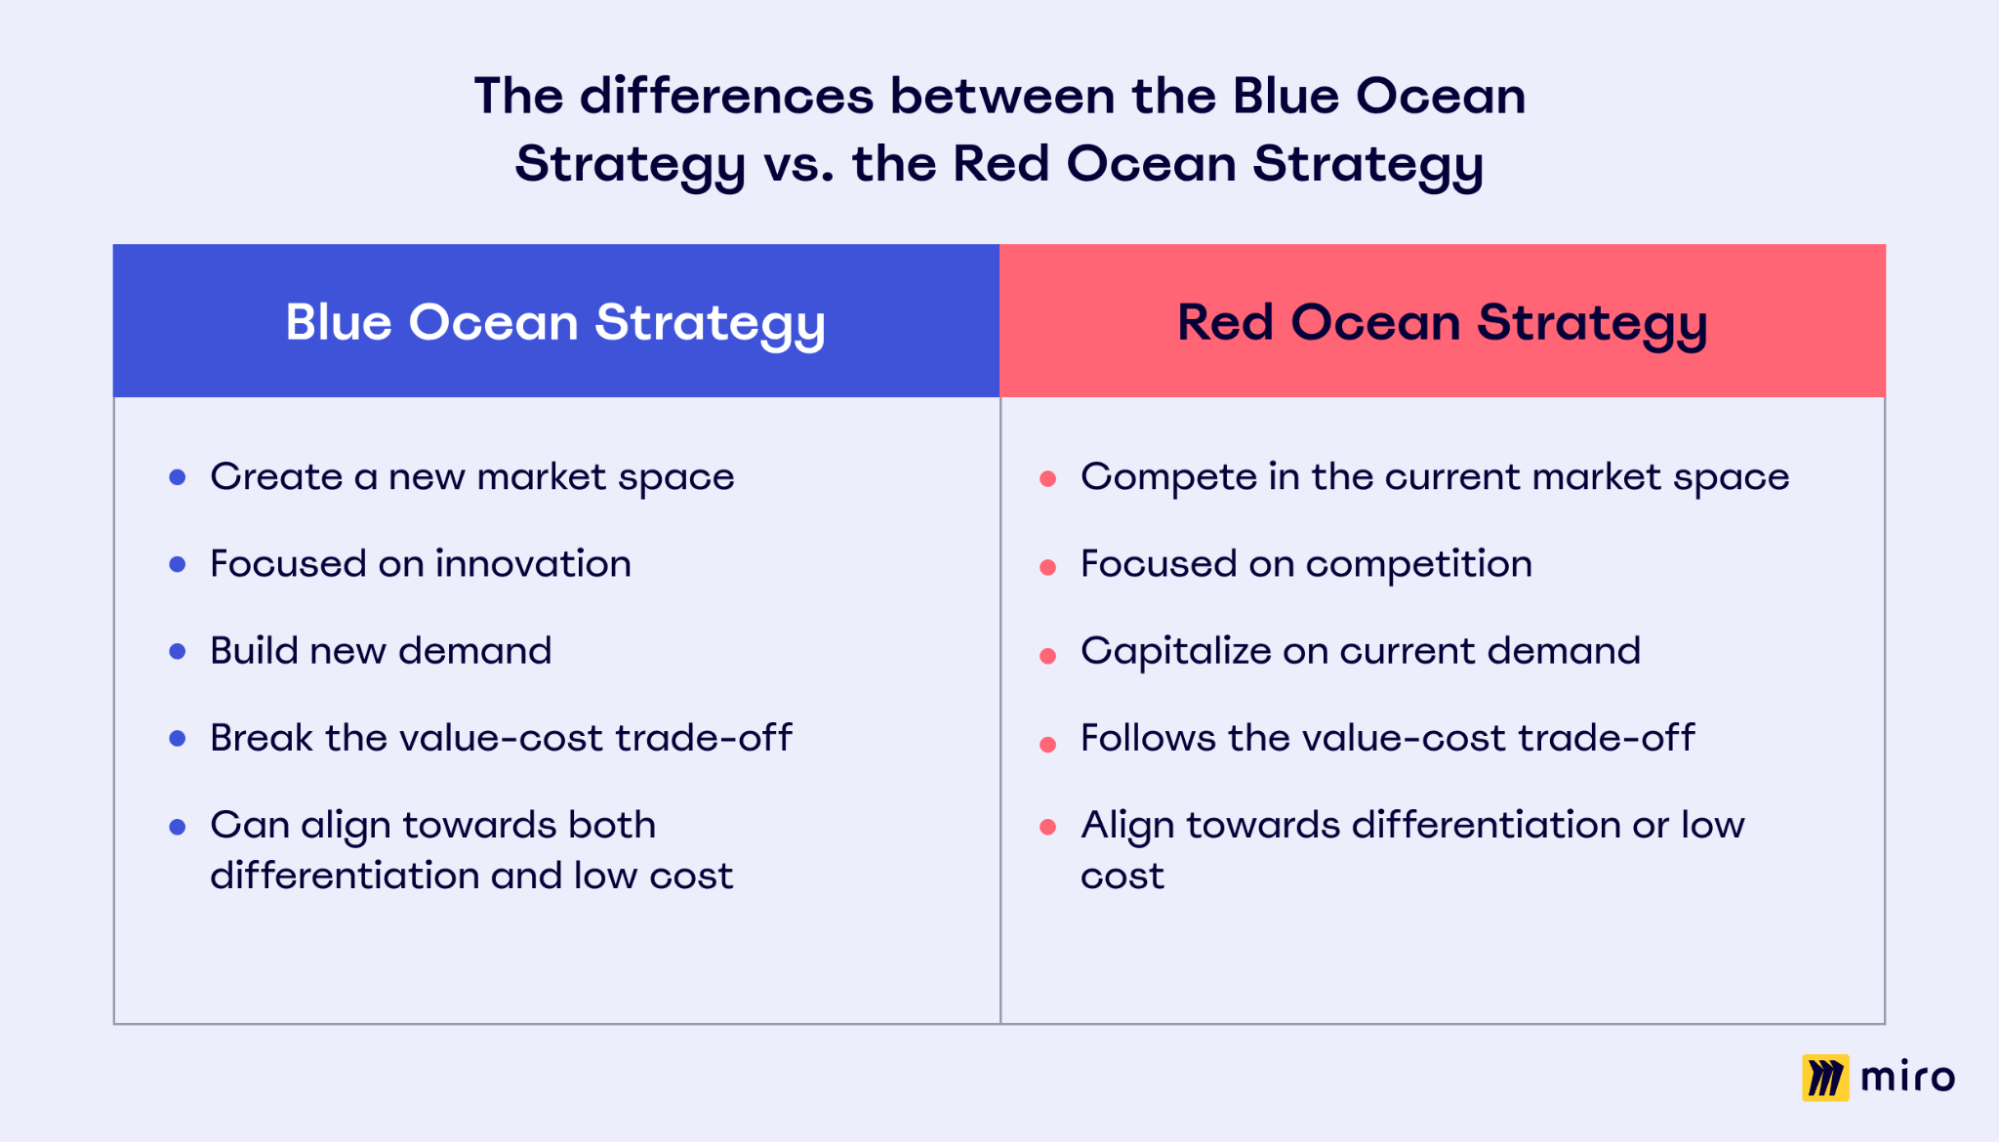 How the blue ocean strategy differs from the red ocean strategy